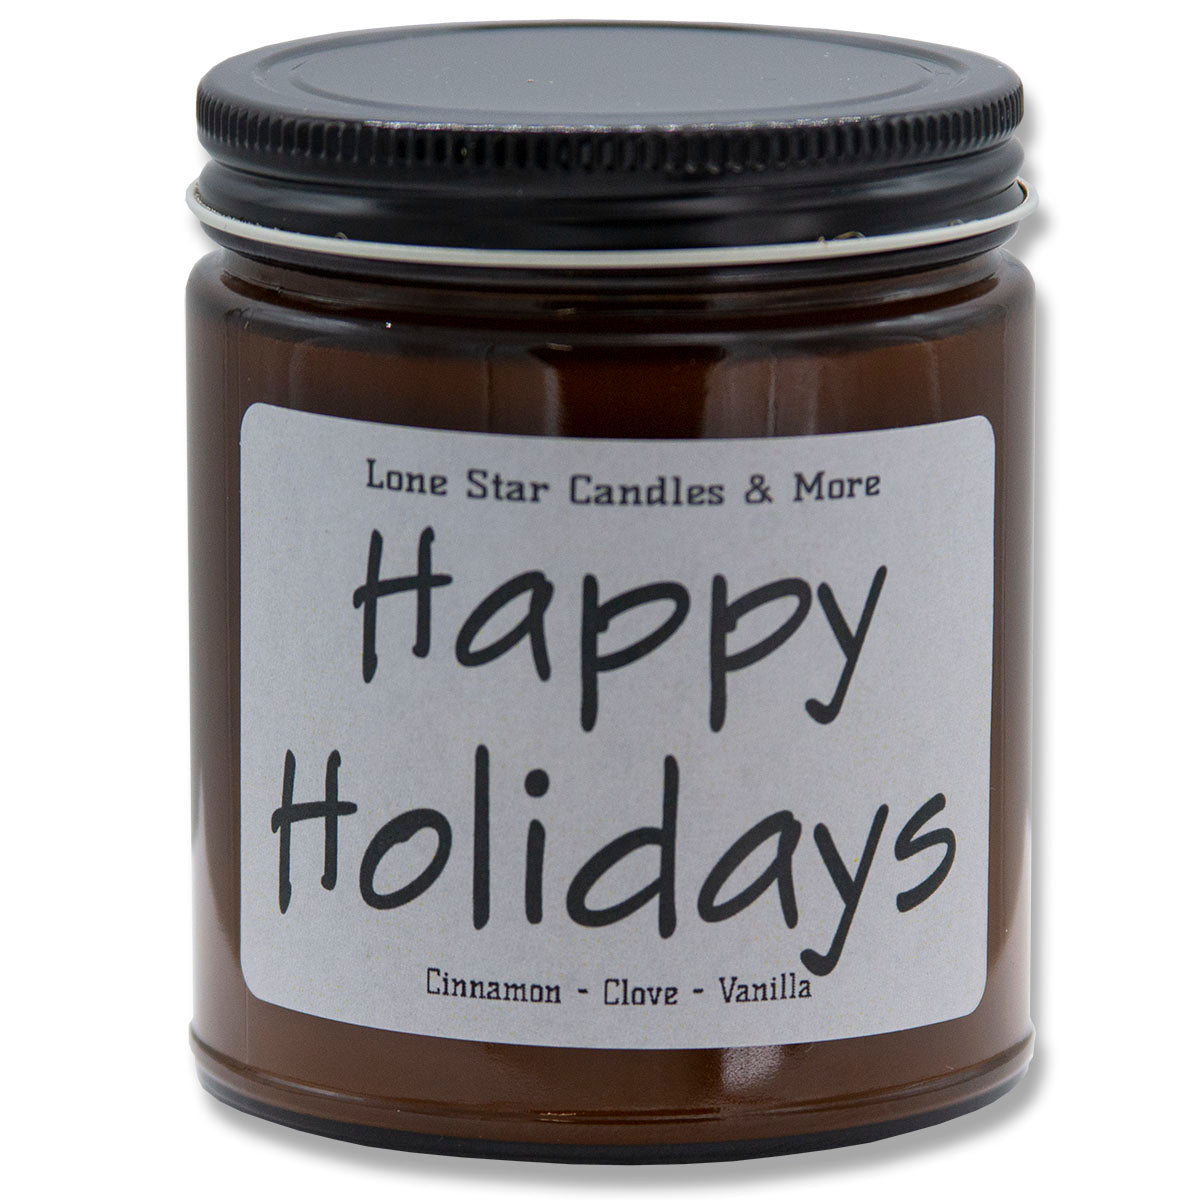 Cinnamon Vanilla, Lone Star Candles & More's Premium Hand Poured Strong Scented Soy Wax Gift Candle, Ground Cinnamon & Sweet Vanilla Bean, USA Made in Texas, Round Amber Glass Jars, 9oz Happy Holidays